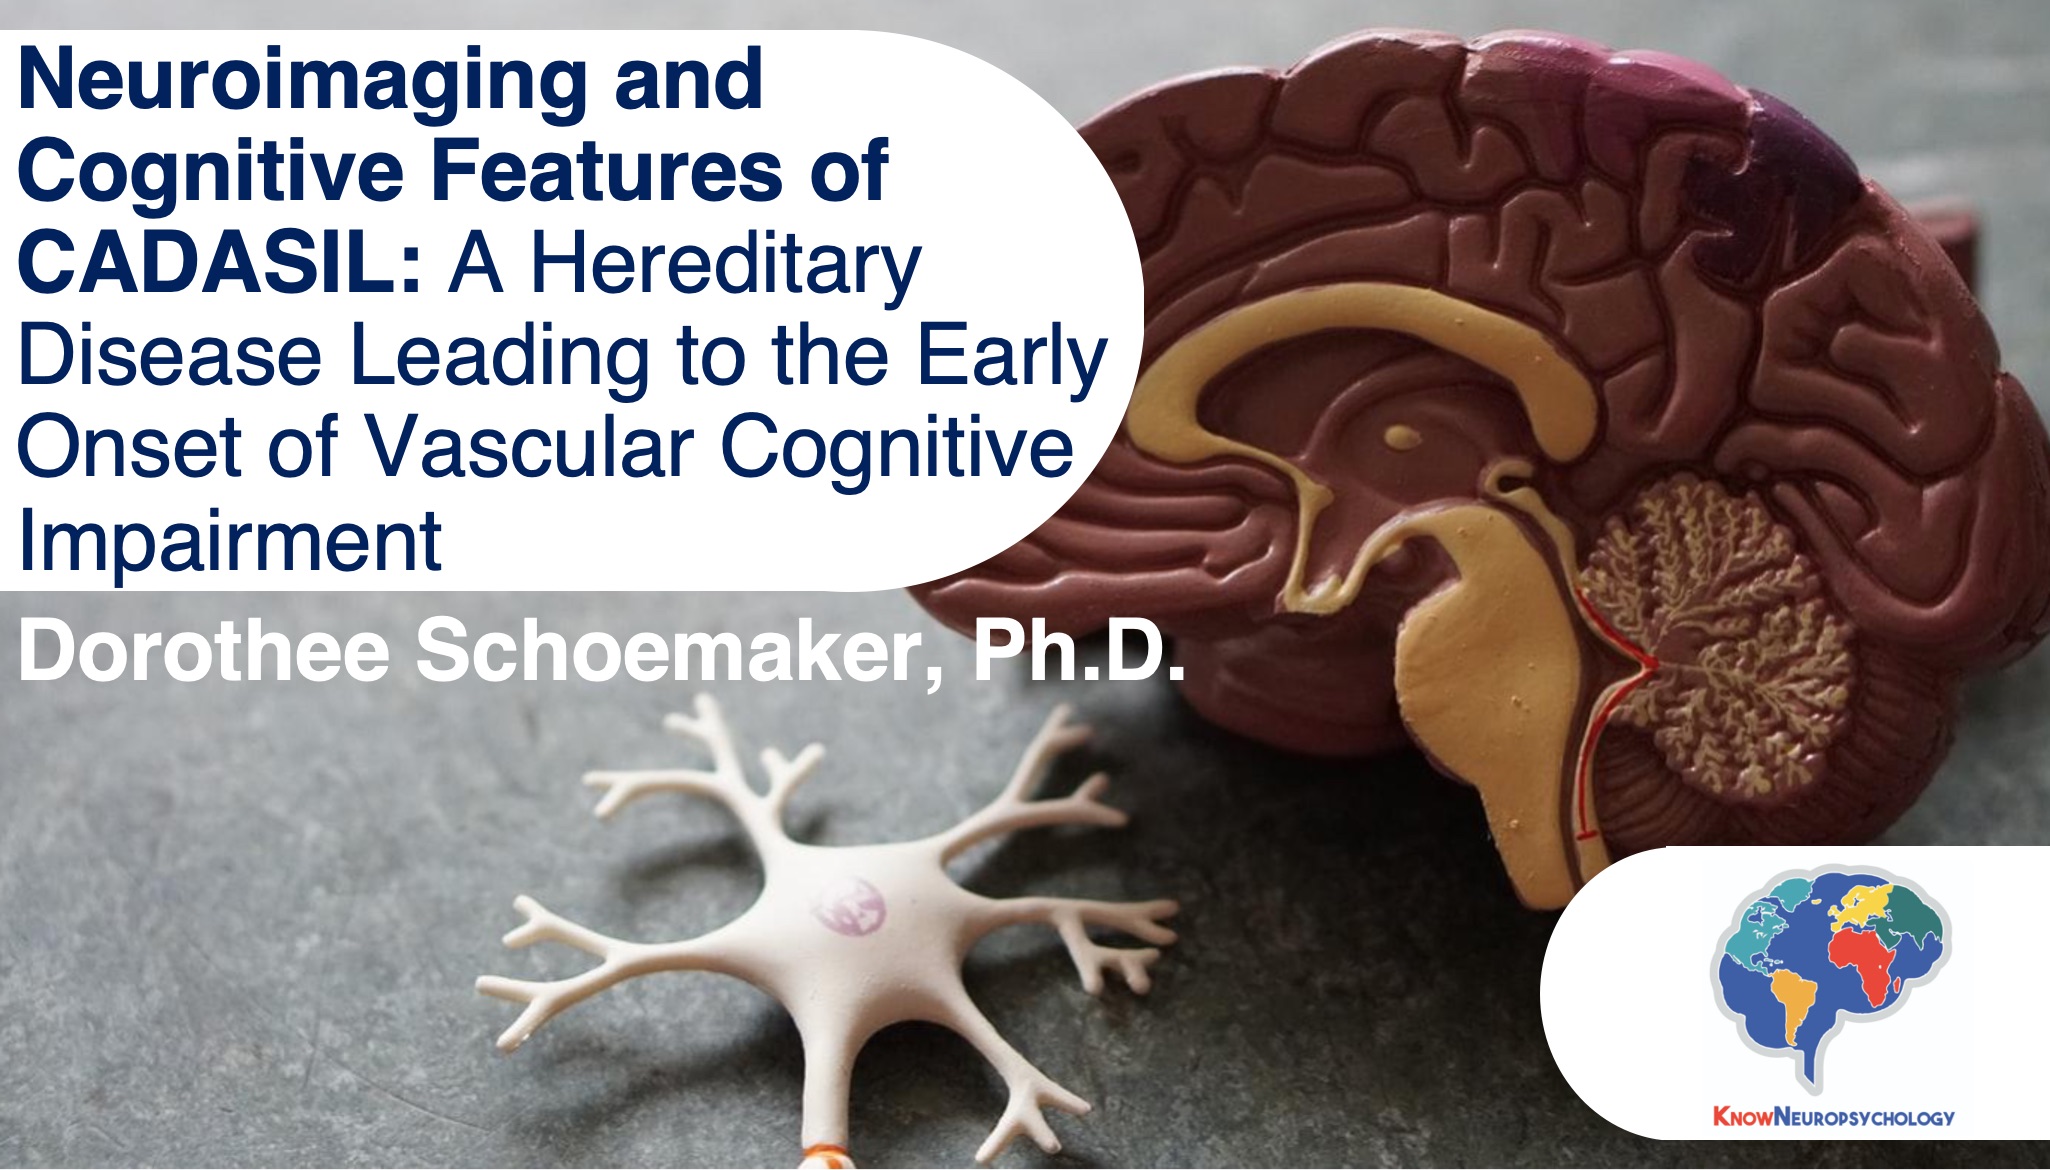 Neuroimaging and cognitive features of CADASIL: A hereditary disease leading to the early onset of vascular cognitive impairment by Dr. Dorothee Schoemaker